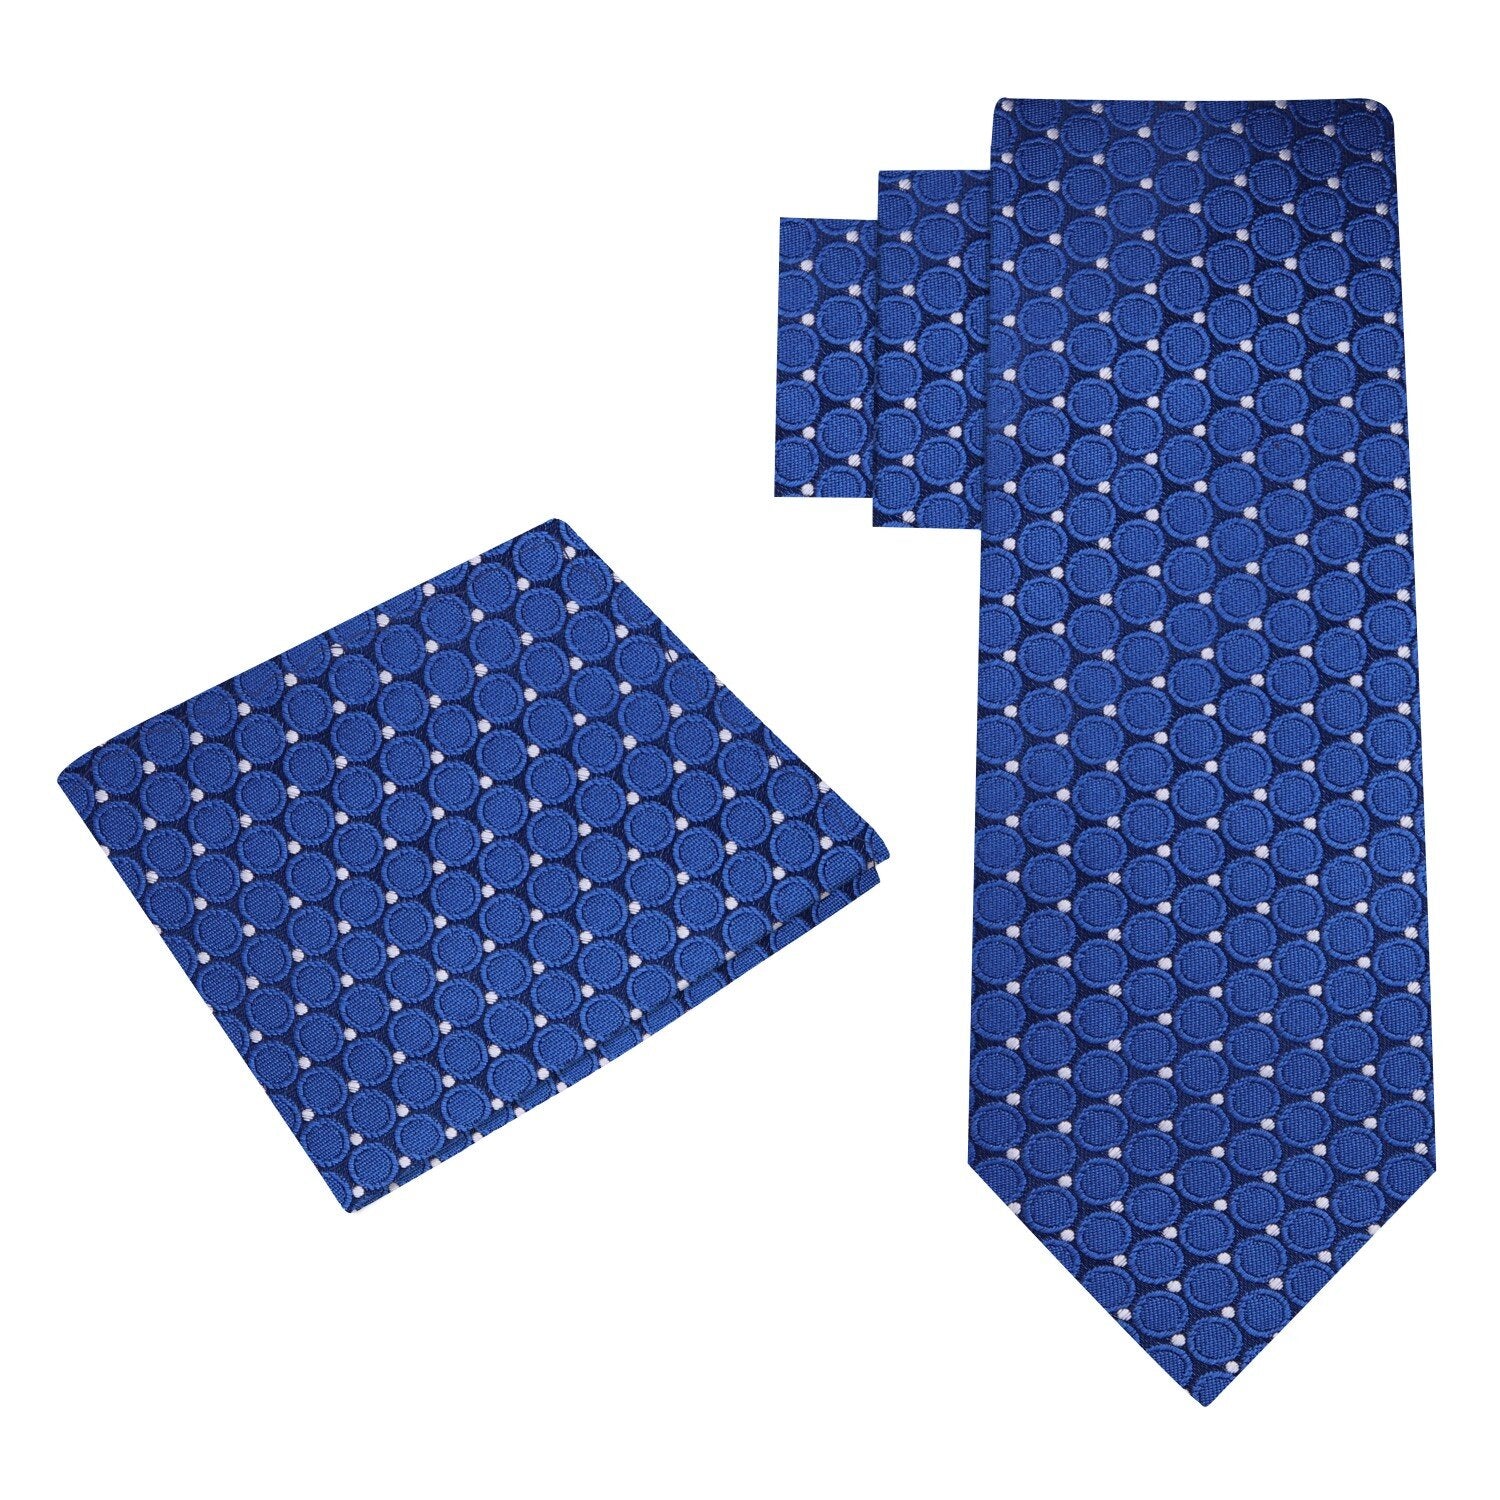 Alt View: Blue, White Circles Tie and Pocket Square